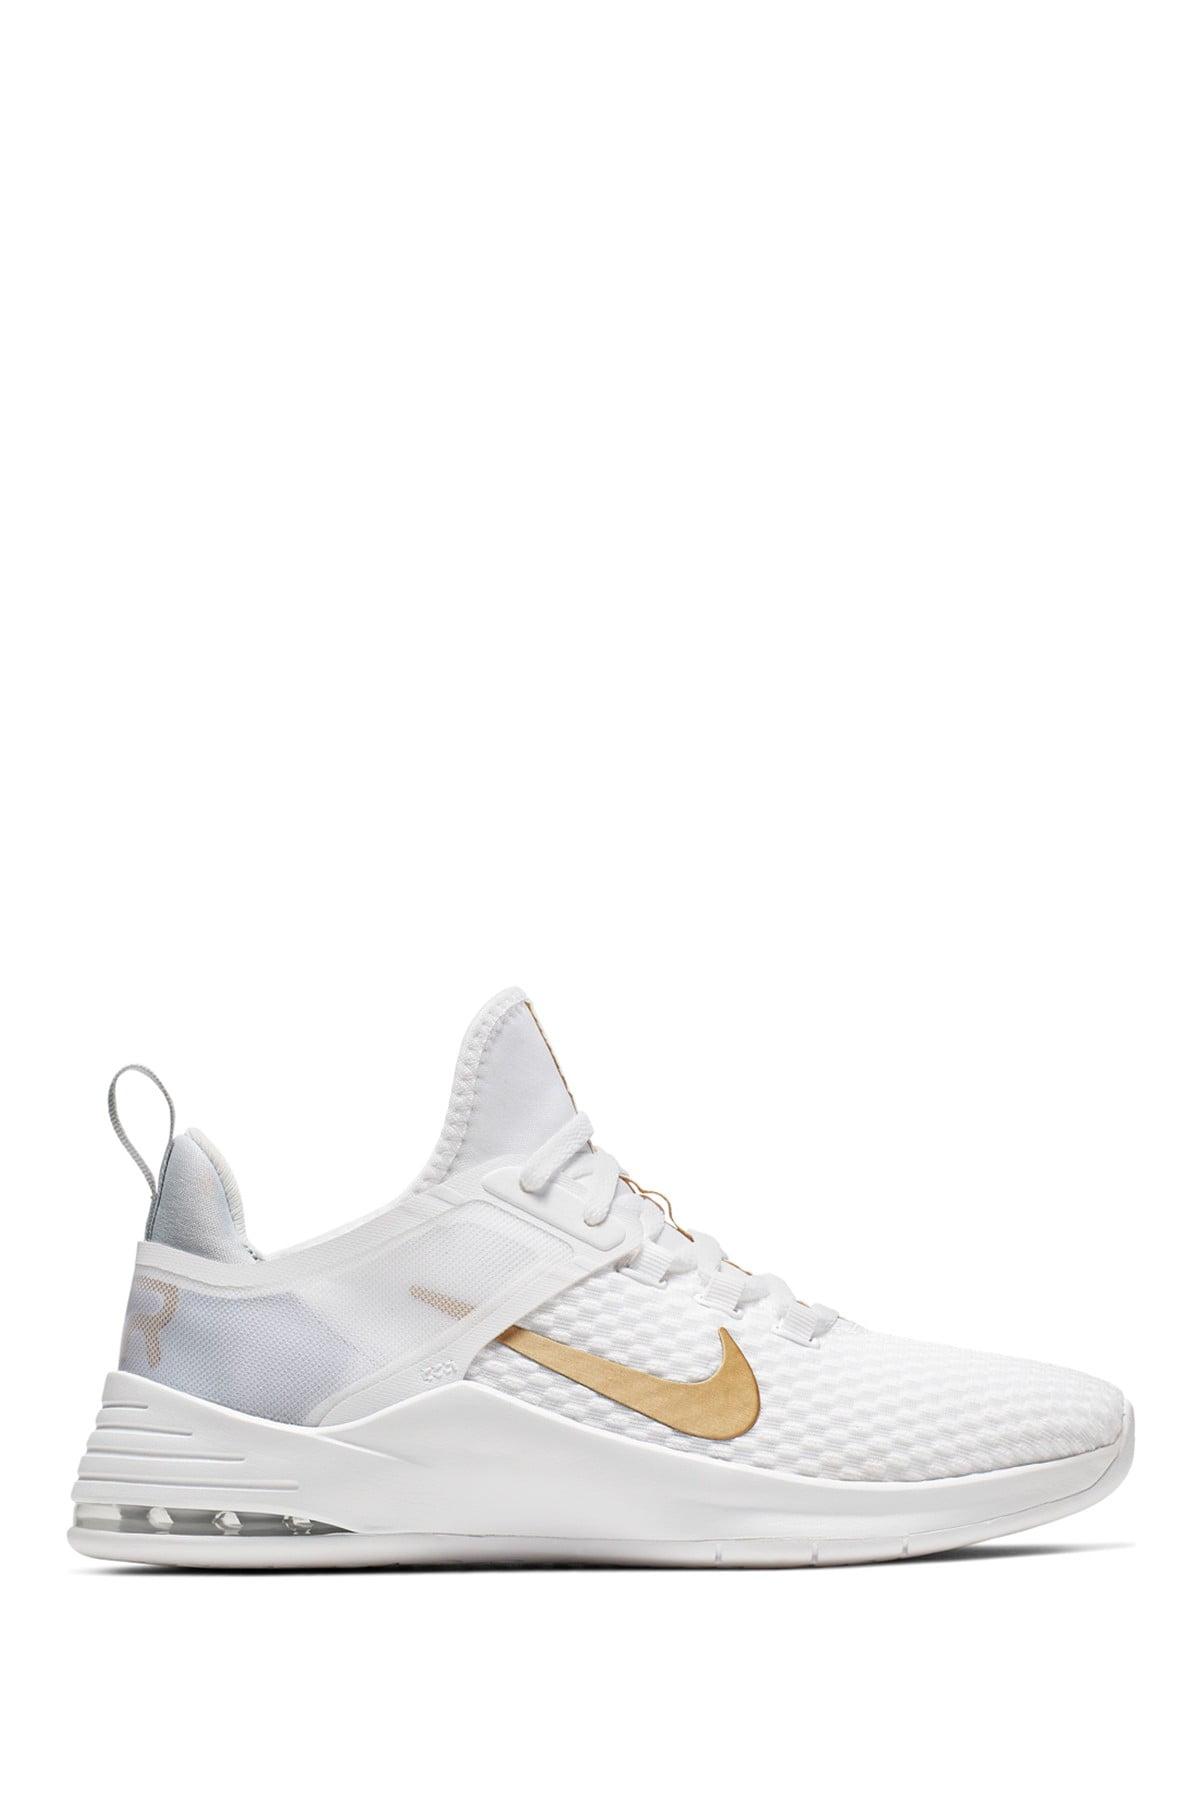 Nike Synthetic Air Max Bella Tr 2 Training Shoe in White | Lyst